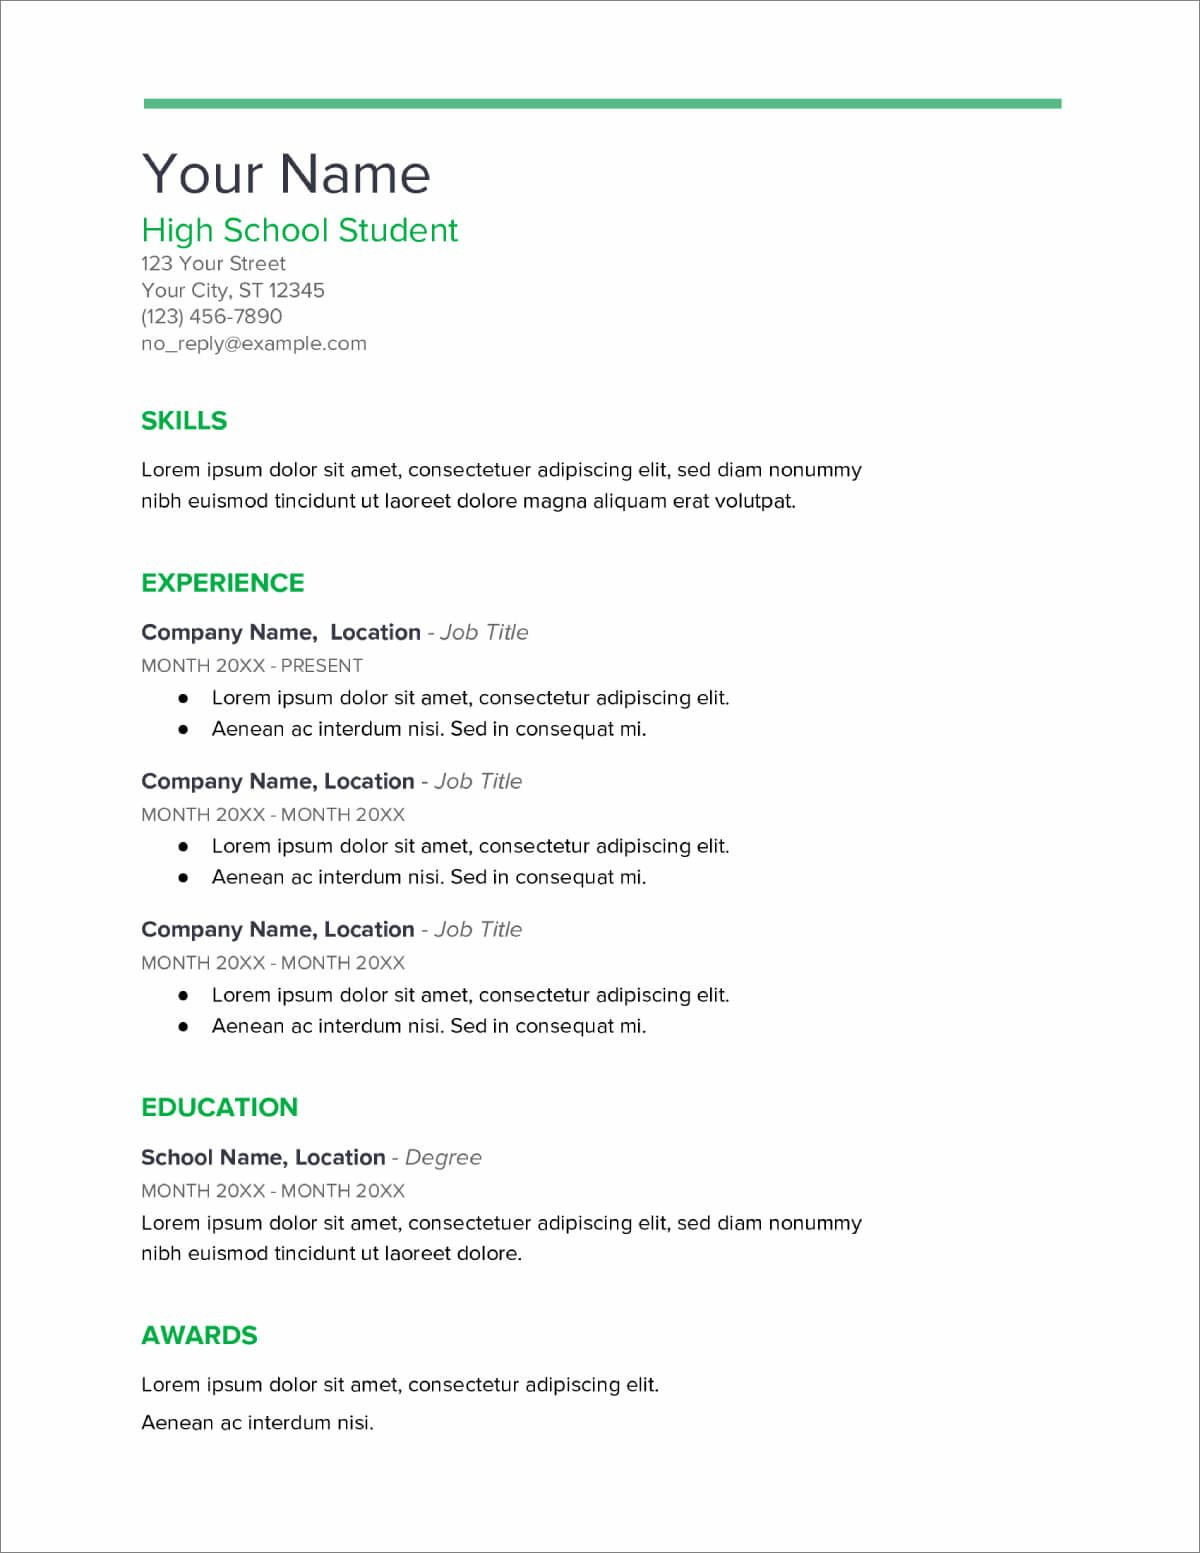 Printable Resume Template for High School Students 20lancarrezekiq High School Resume Templates [download now]